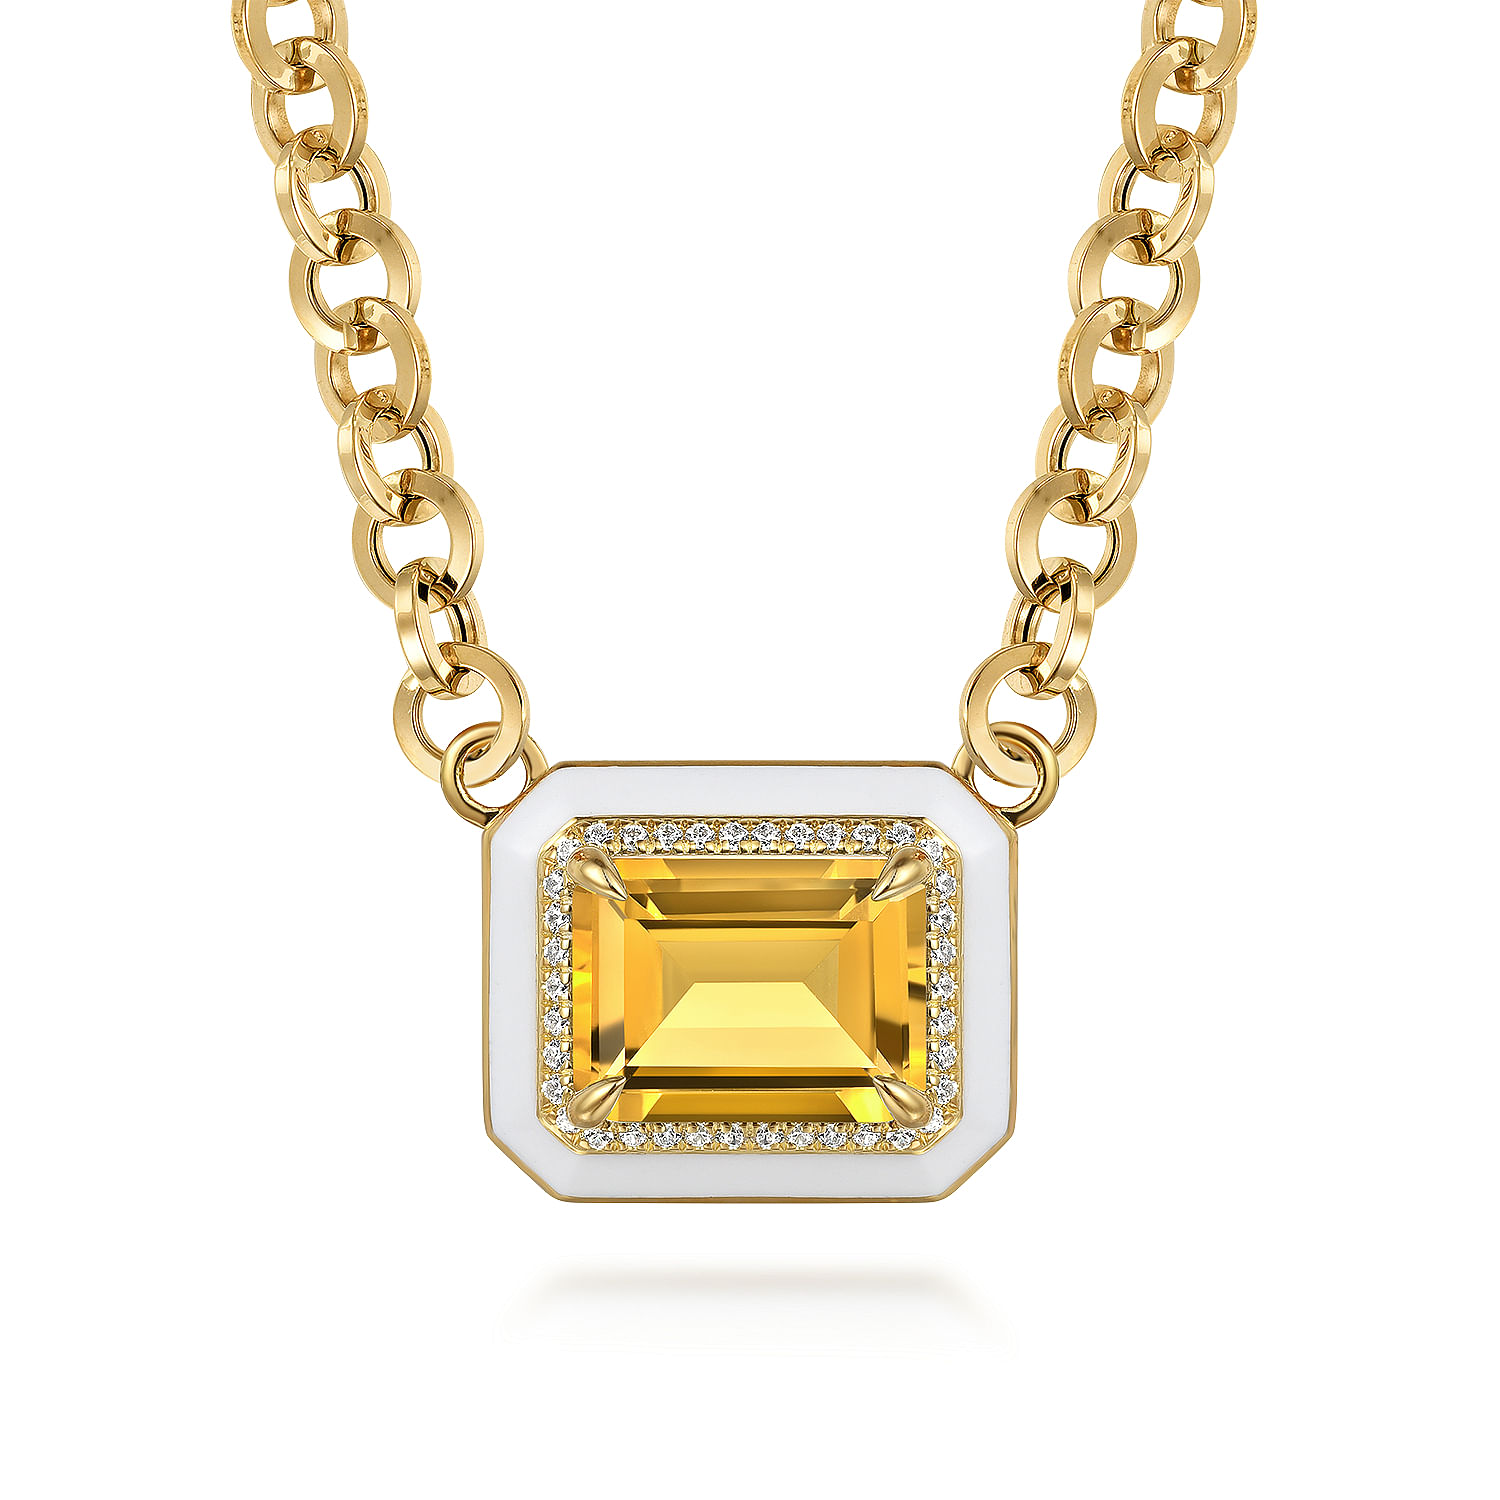 Gabriel - 14K Yellow Gold Diamond and Citrine Emerald Cut Necklace With Flower Pattern J-Back and White Enamel